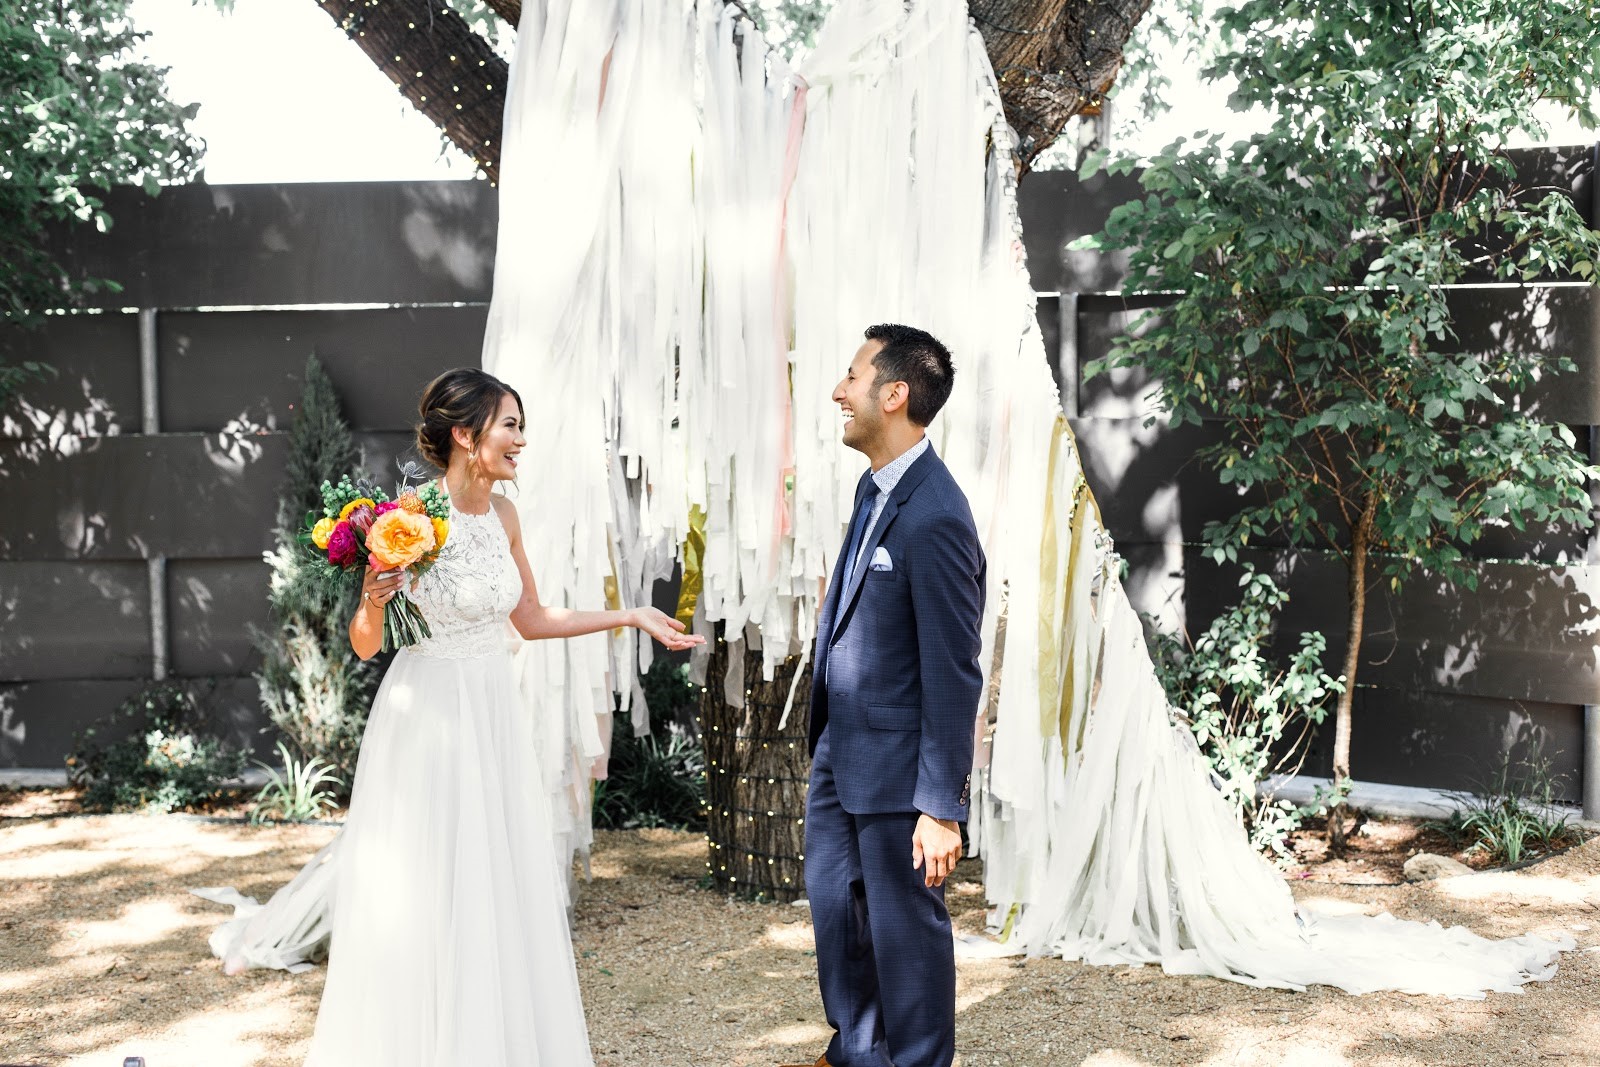 Blog post image Pros & Cons: First Looks Versus Ceremony